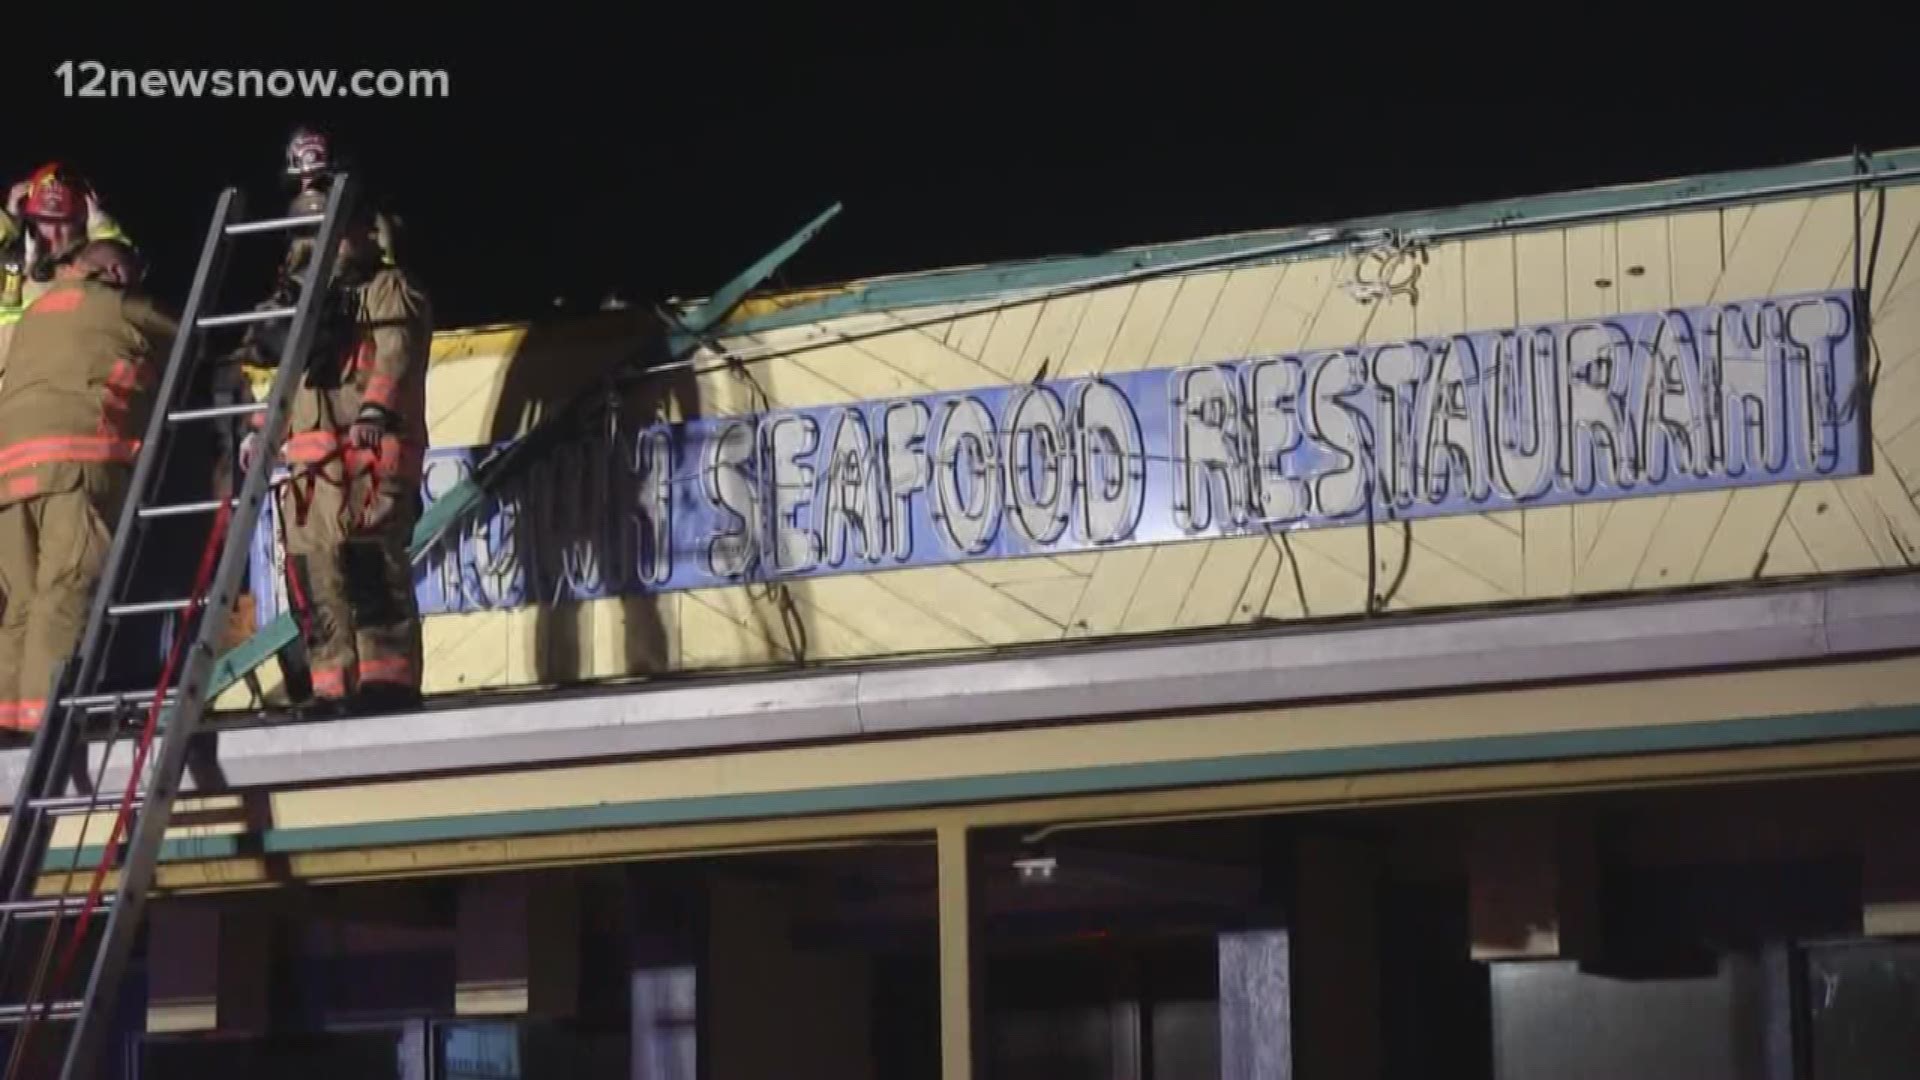 Firefighters rushed to "Baytown Seafood" on Twin City Highway while the restaurant was packed. Witnesses saw flames and smoke coming from the sign on the roof. The fire did not spread inside the building, no injuries were reported.